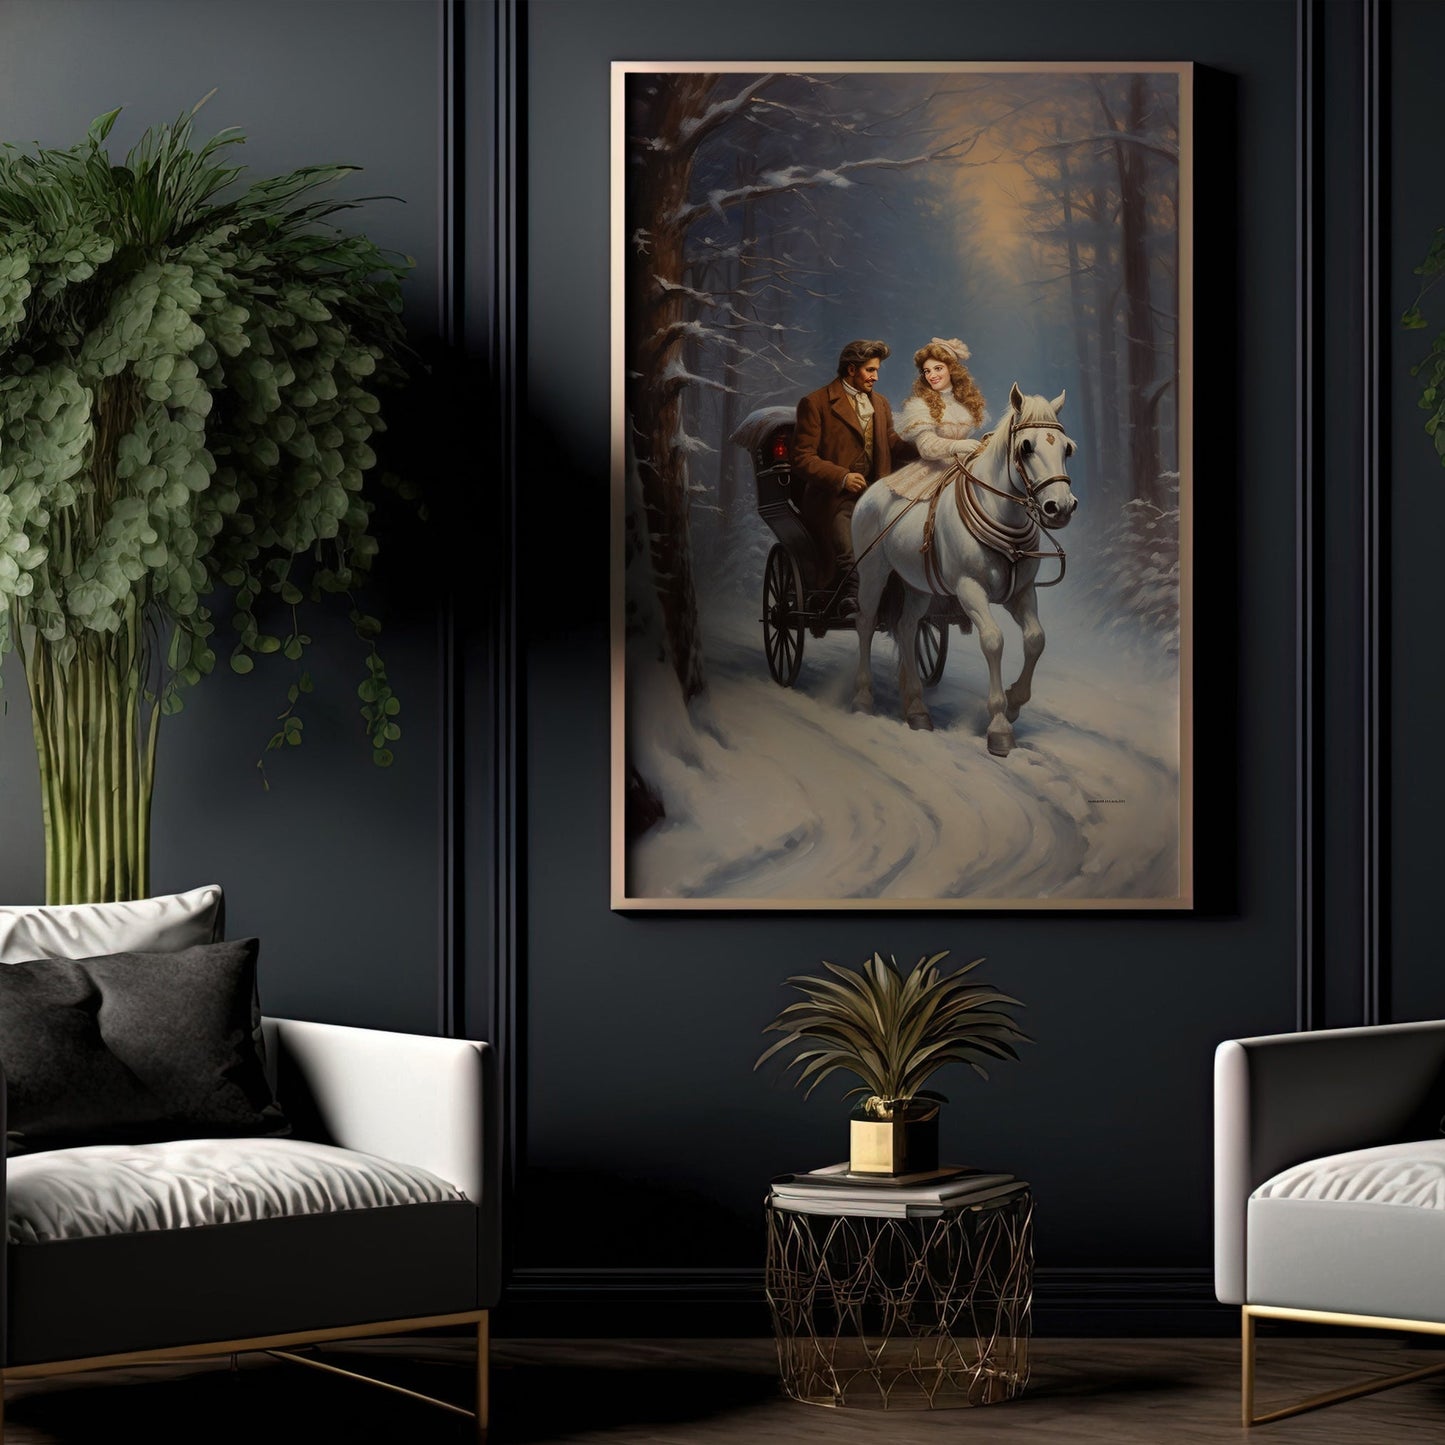 Victorian A Serene Ride Through Snowy, Horse Christmas Canvas Painting, Xmas Wall Art Decor - Poster Gift For Horse Lovers